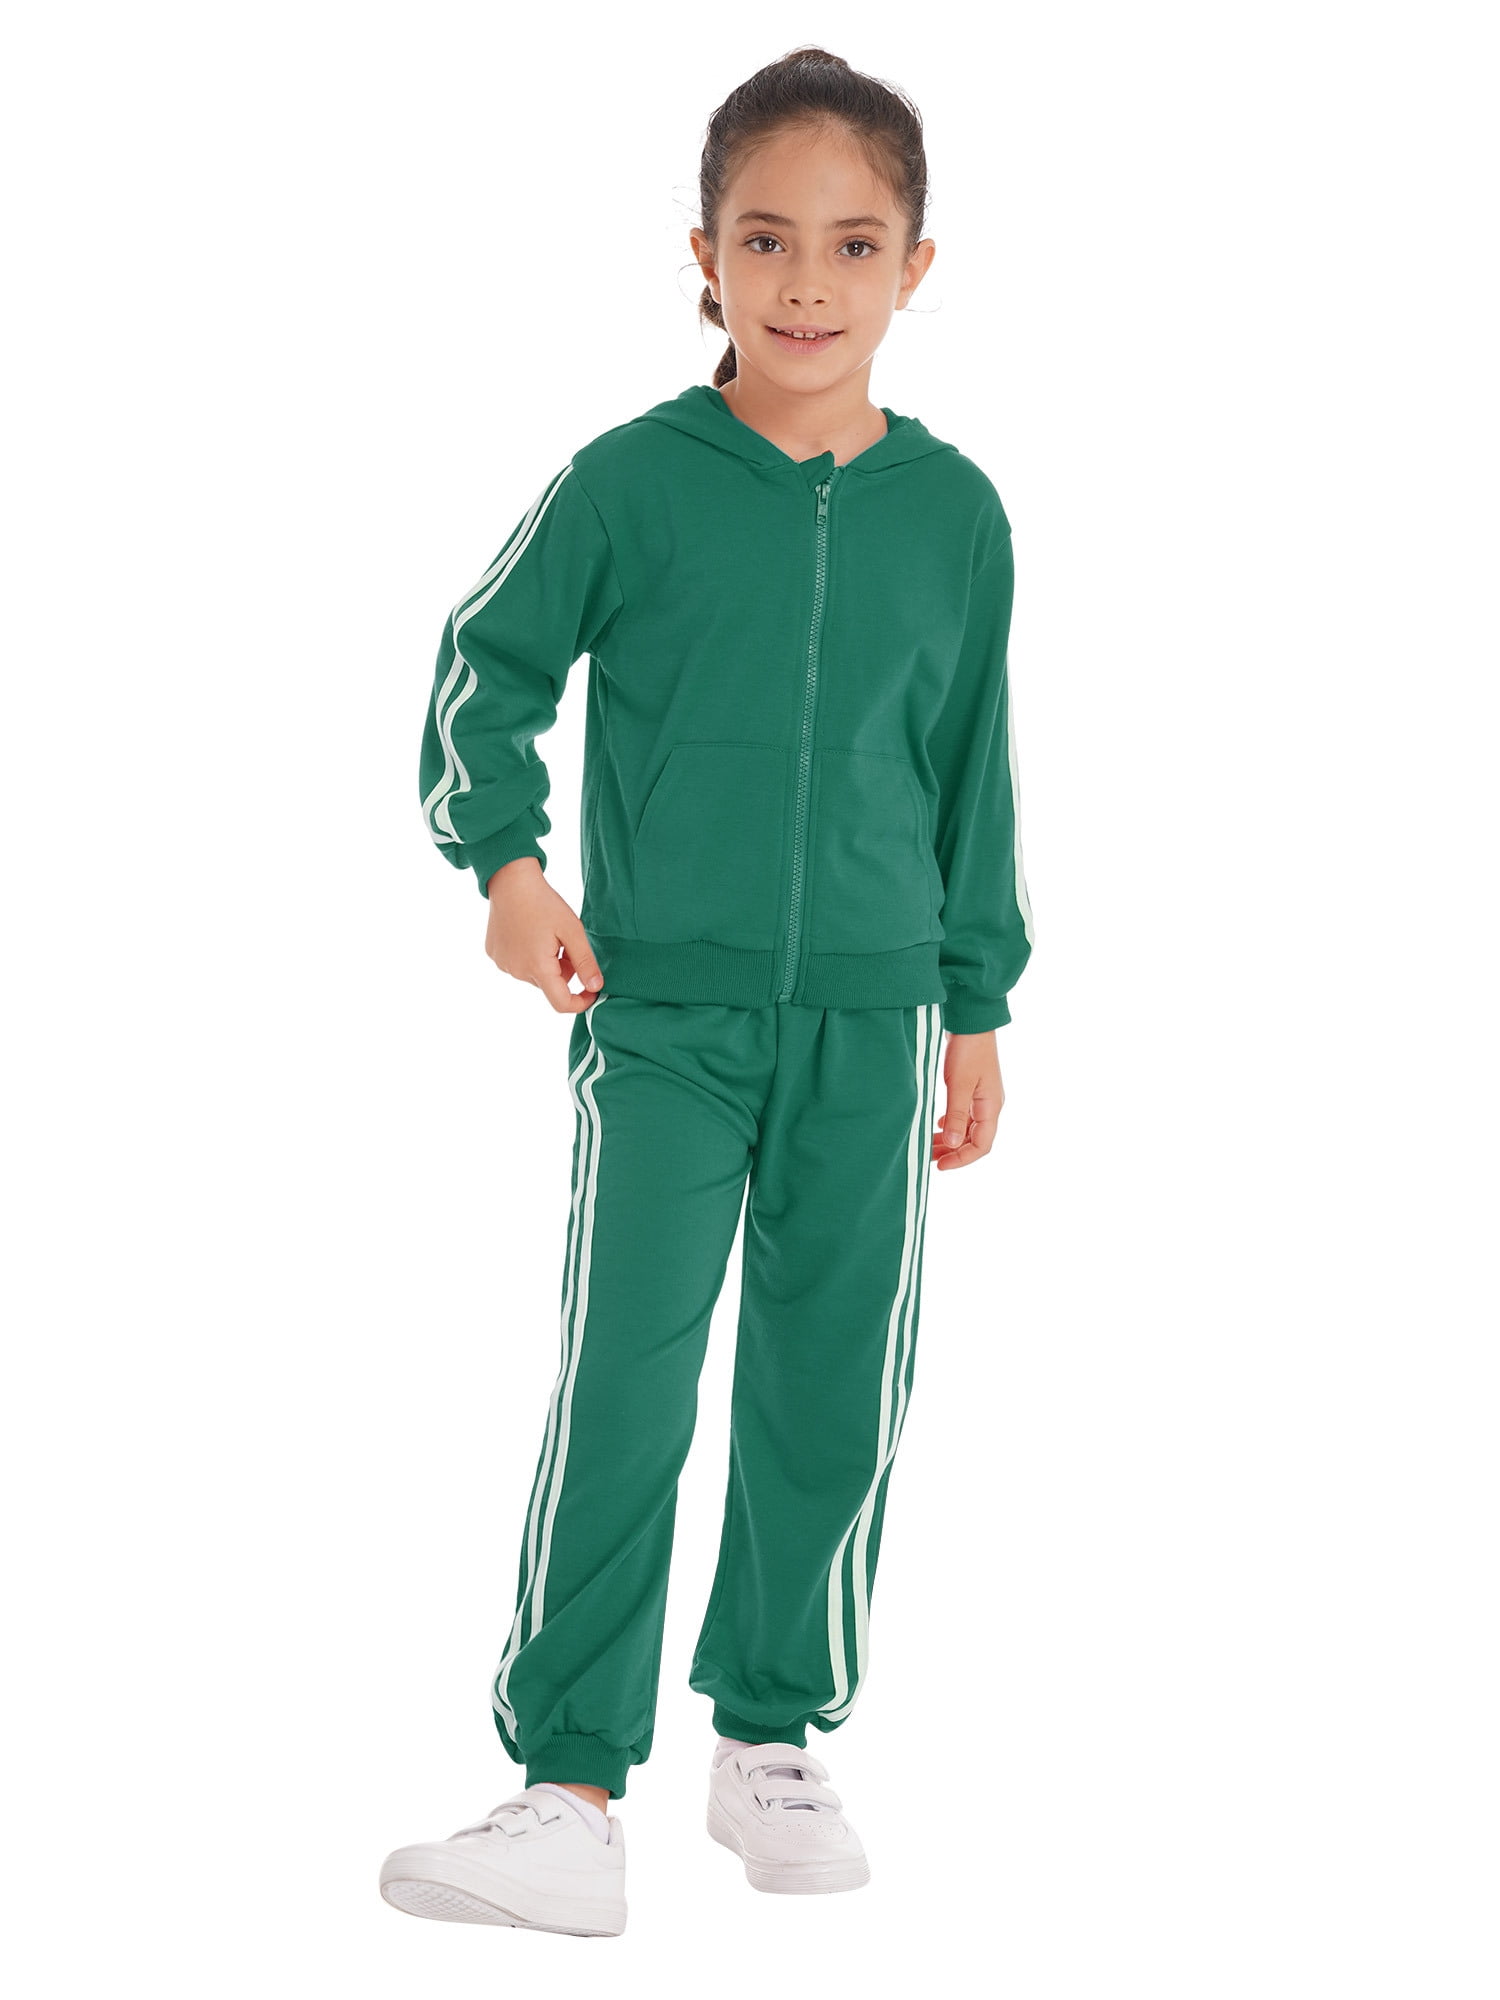 Baby Boy's CHAMPION SWEATSUIT Green Hoodie/Joggers Outfit 2-Piece Set 24M  NWT